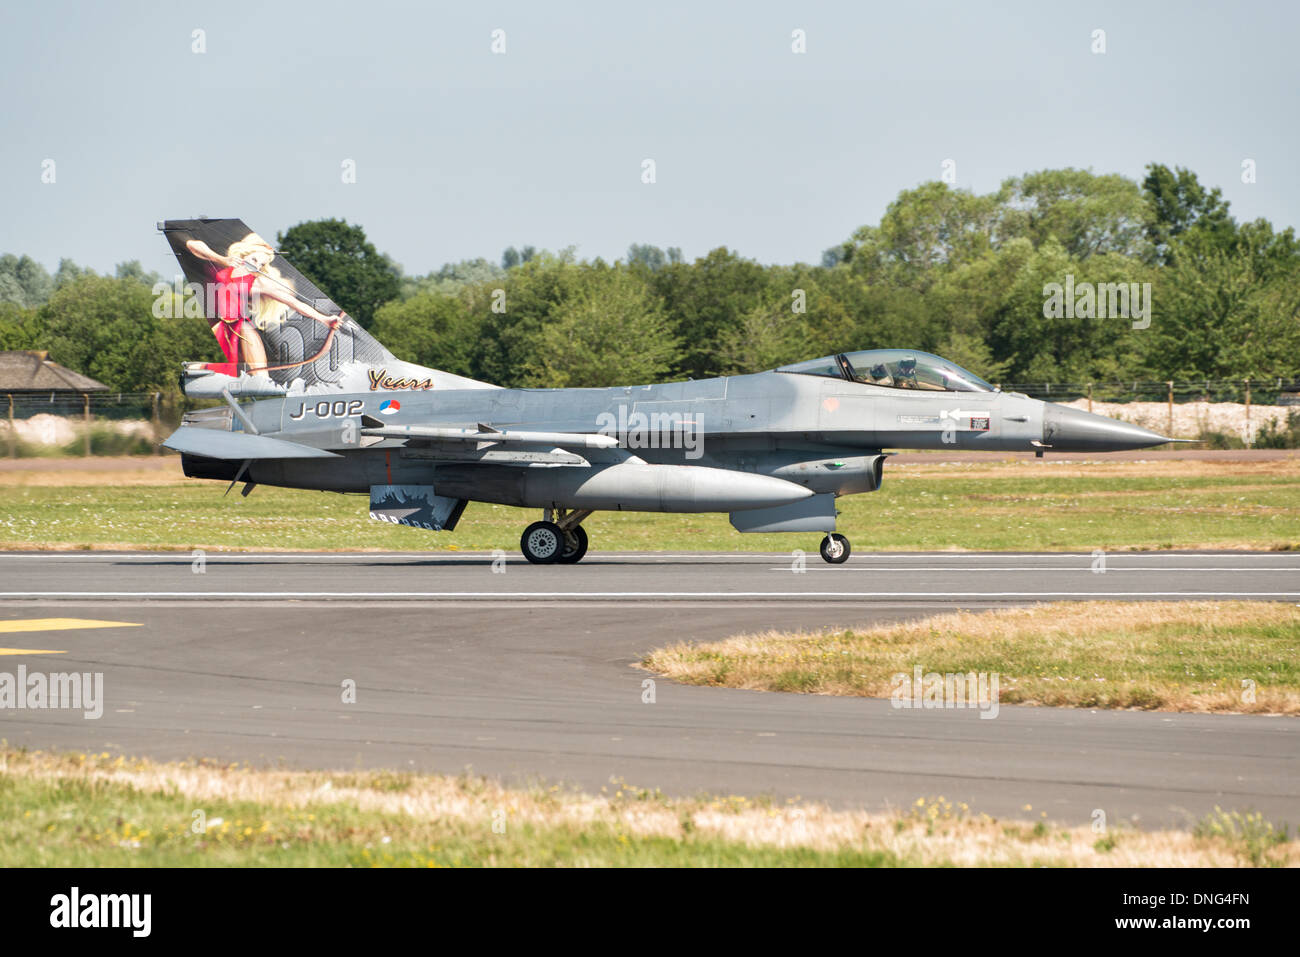 A Royal Netherlands Air Force F-16AM Fighting Falcon Jet Fighter from 323 Squadron slows after landing at RAF Fairford Stock Photo